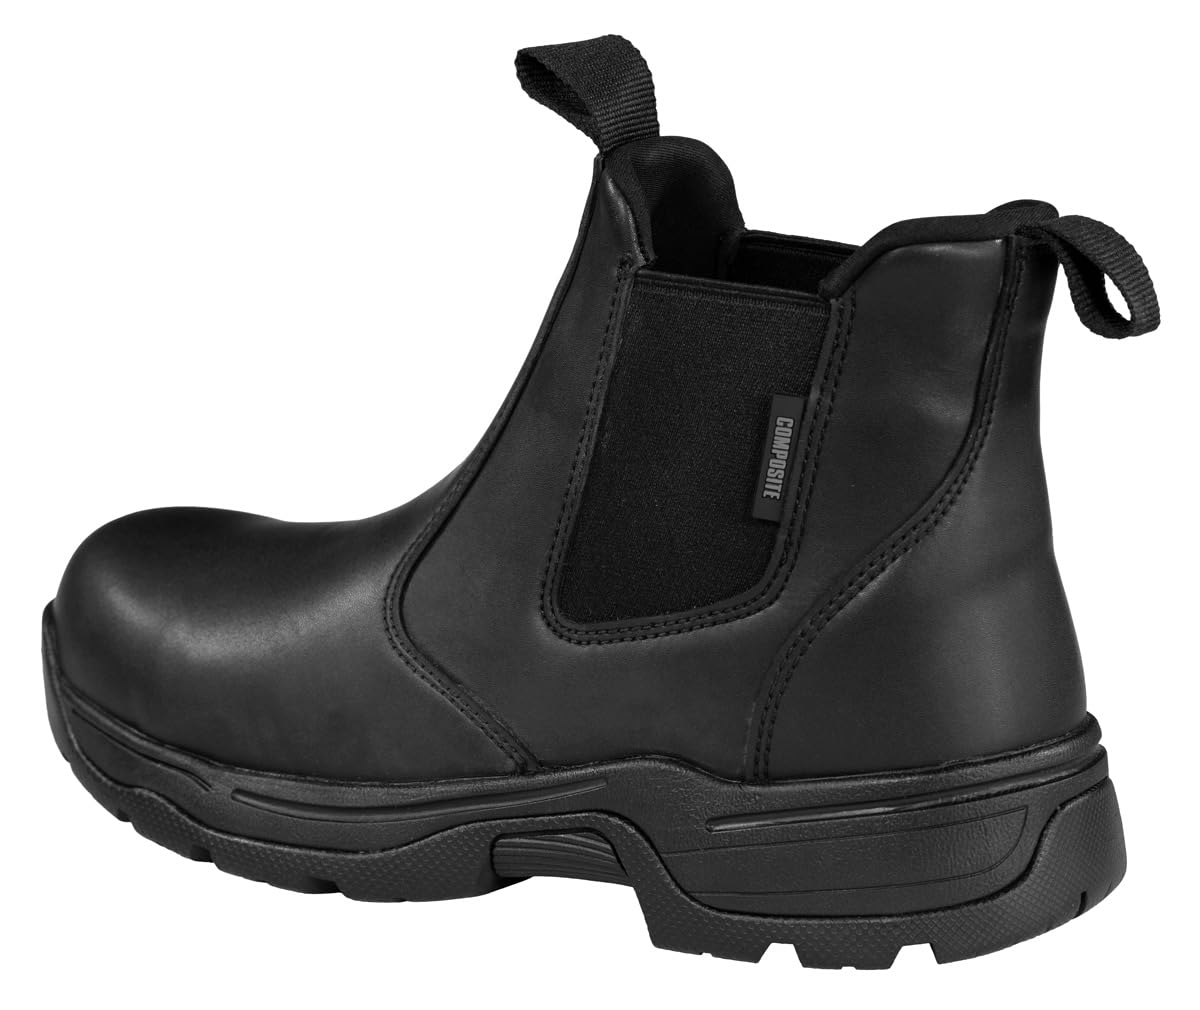 Propper Men's F45351T Fire and Safety Shoe, Black, 6.5